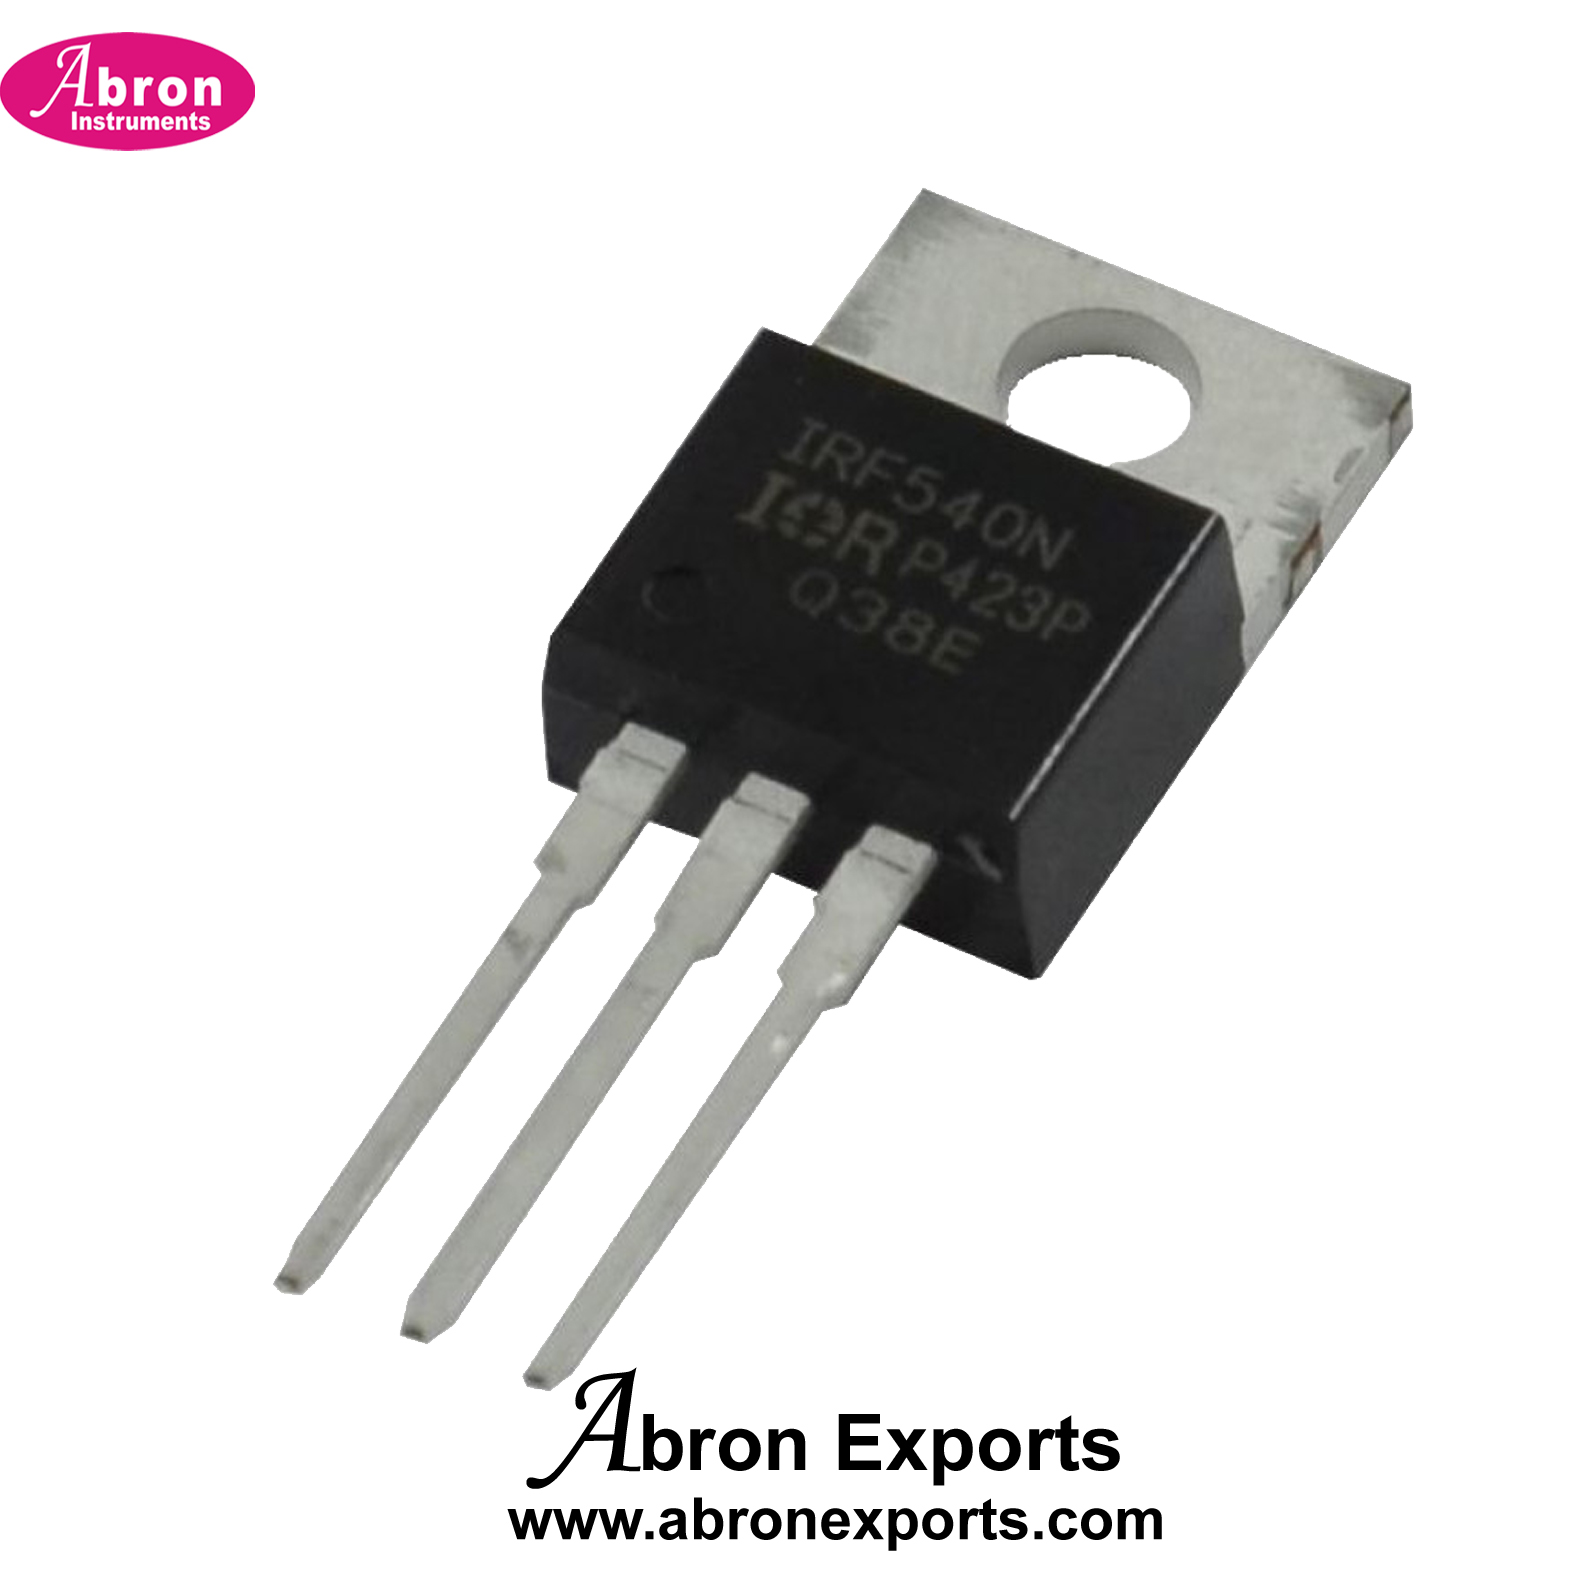 Electronic Component MOSFET IRF 510 or 5210 3 Legs 100pc Abron